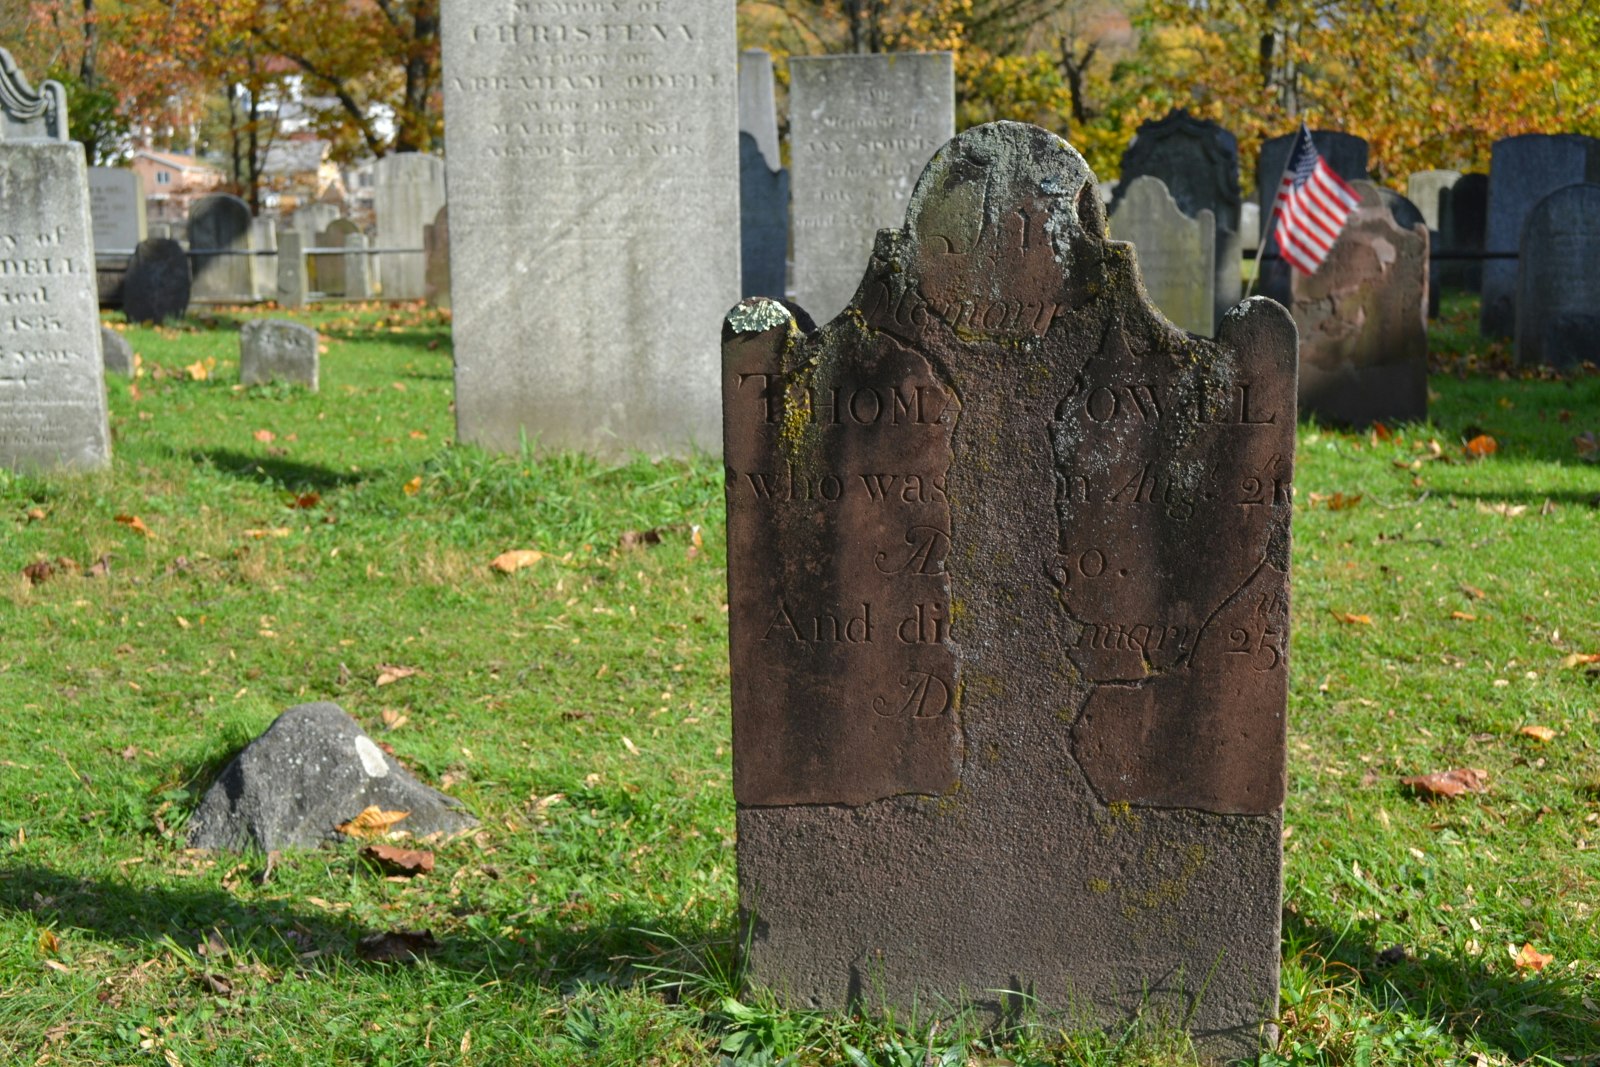 A weathered headstone with faded inscriptions in an old cemetery, with the US flag in the background